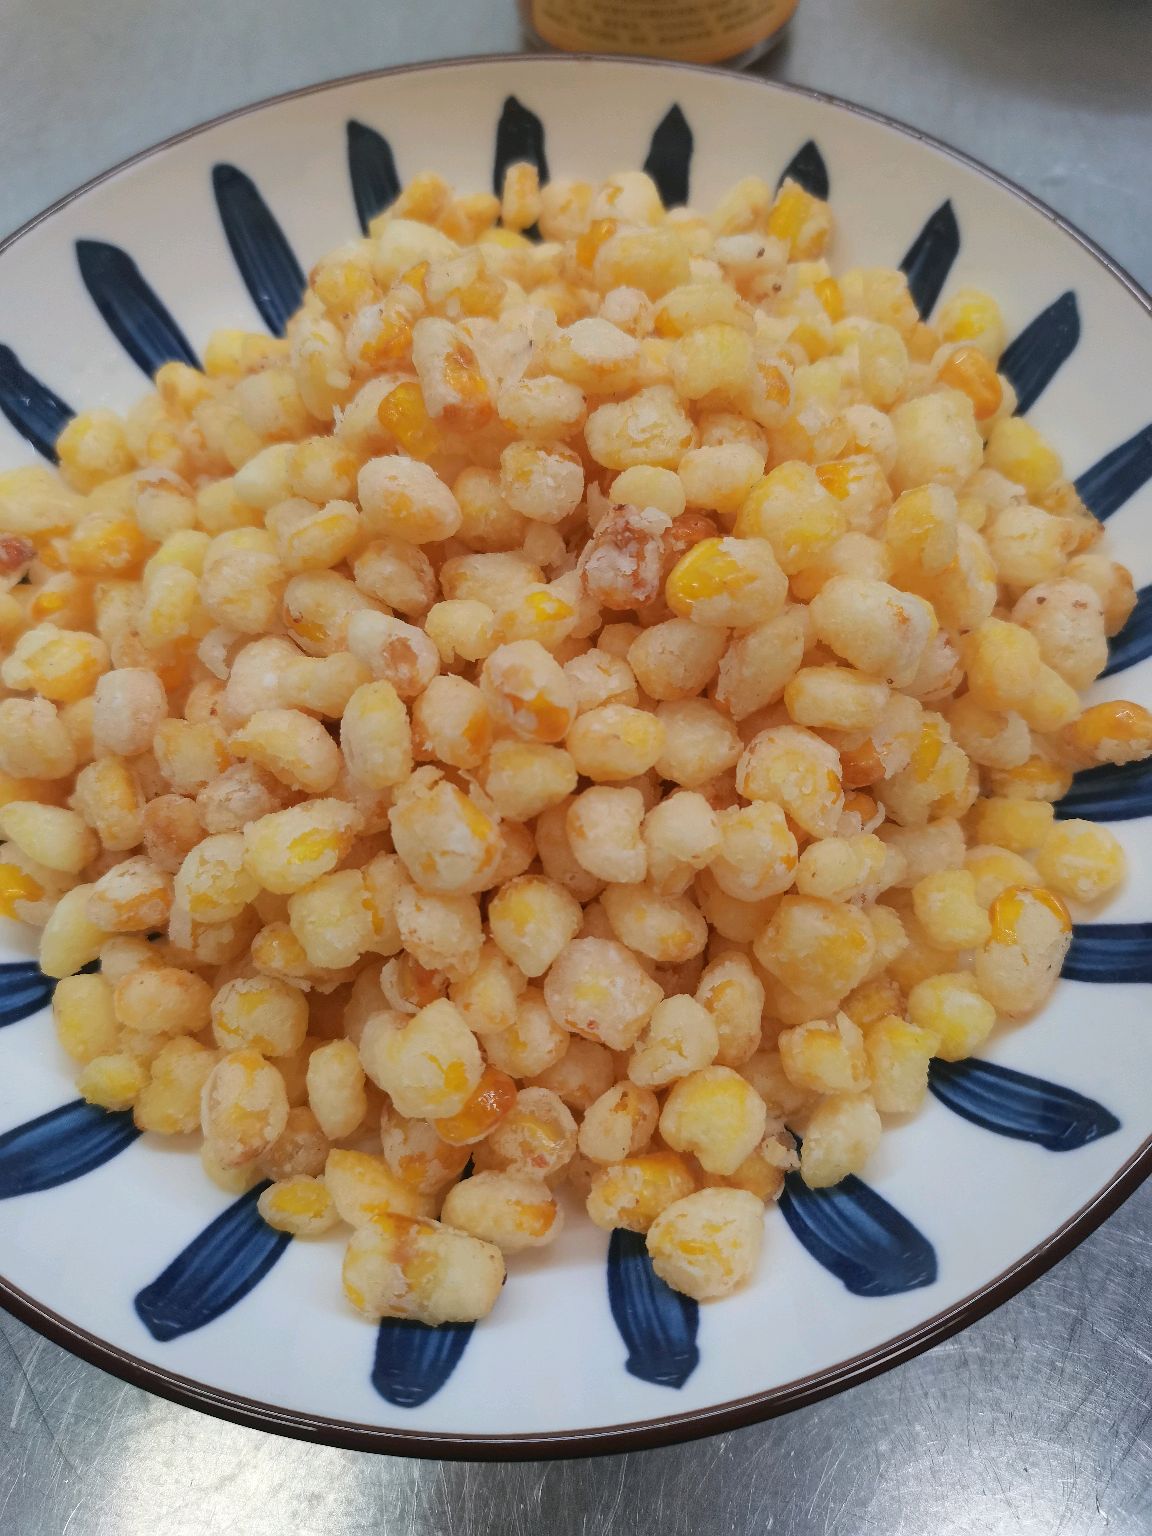 The fried corn kernels are relatively complete and are basically wrapped in a coat